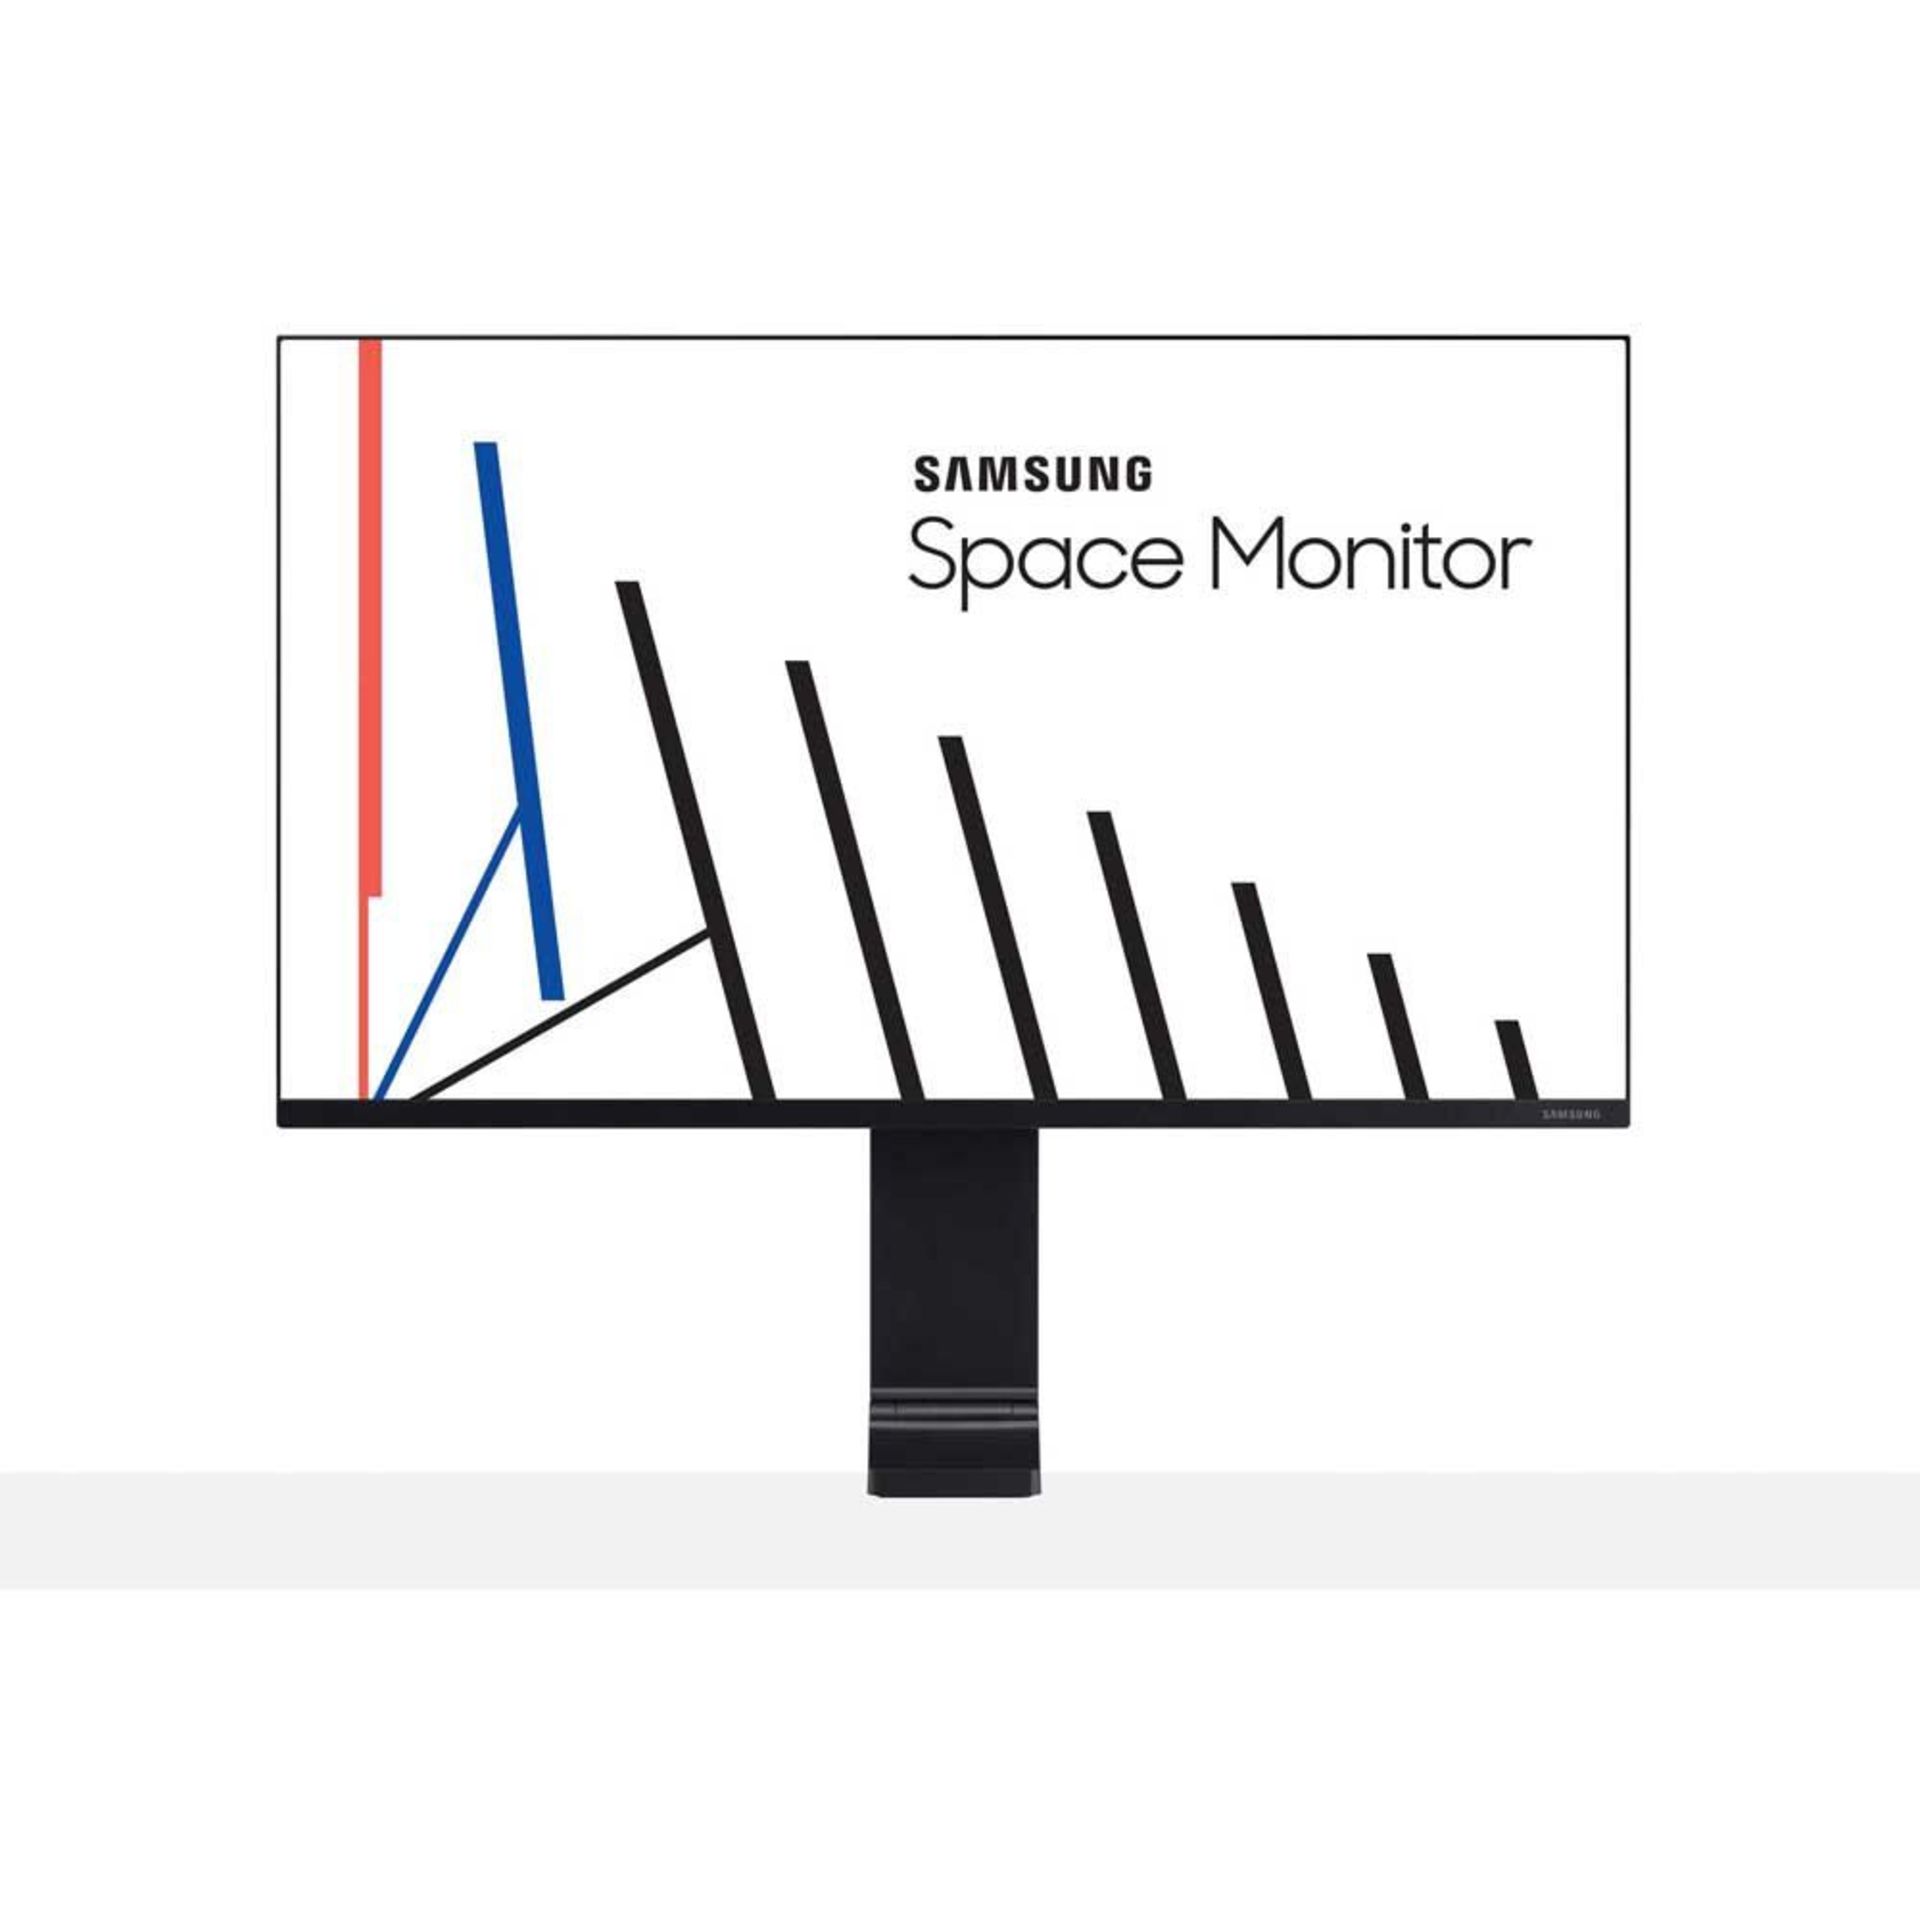 Samsung Space LS32R750 32in 3840x2160 UHD Monitor. - PCKBW. RRP £419.00. The Samsung Space Monitor - Bild 2 aus 2